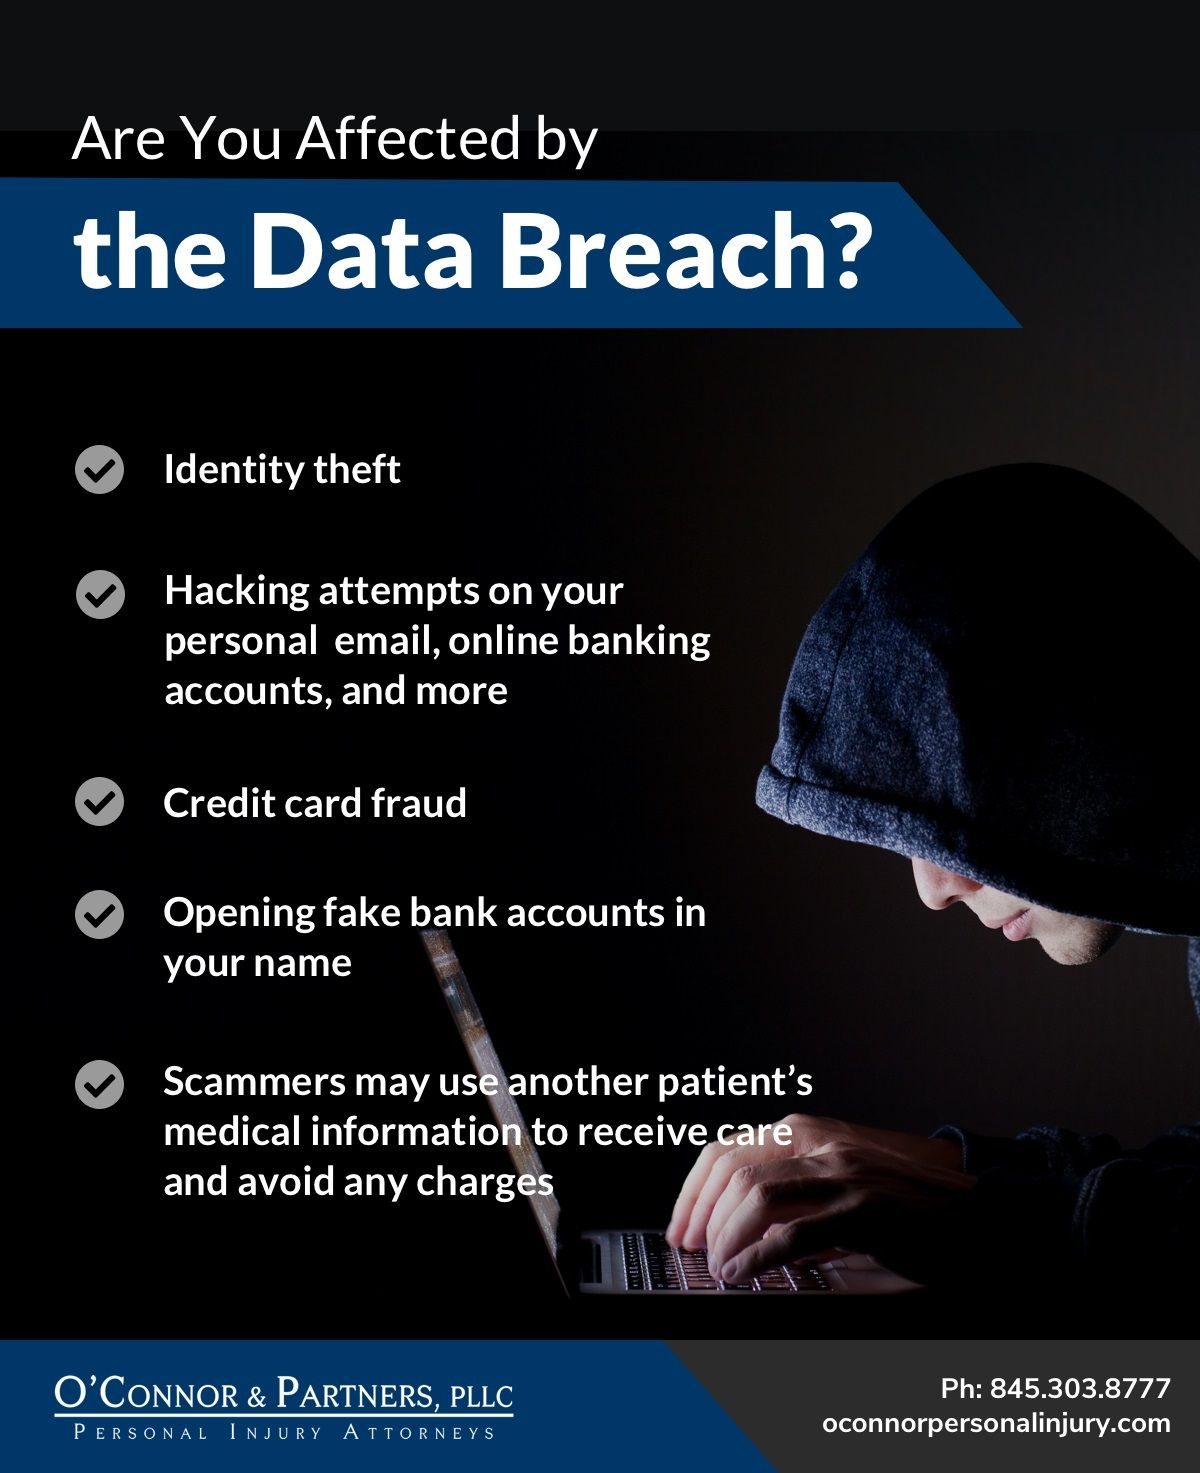 Are You Affected by the Health Quest Data Breach?